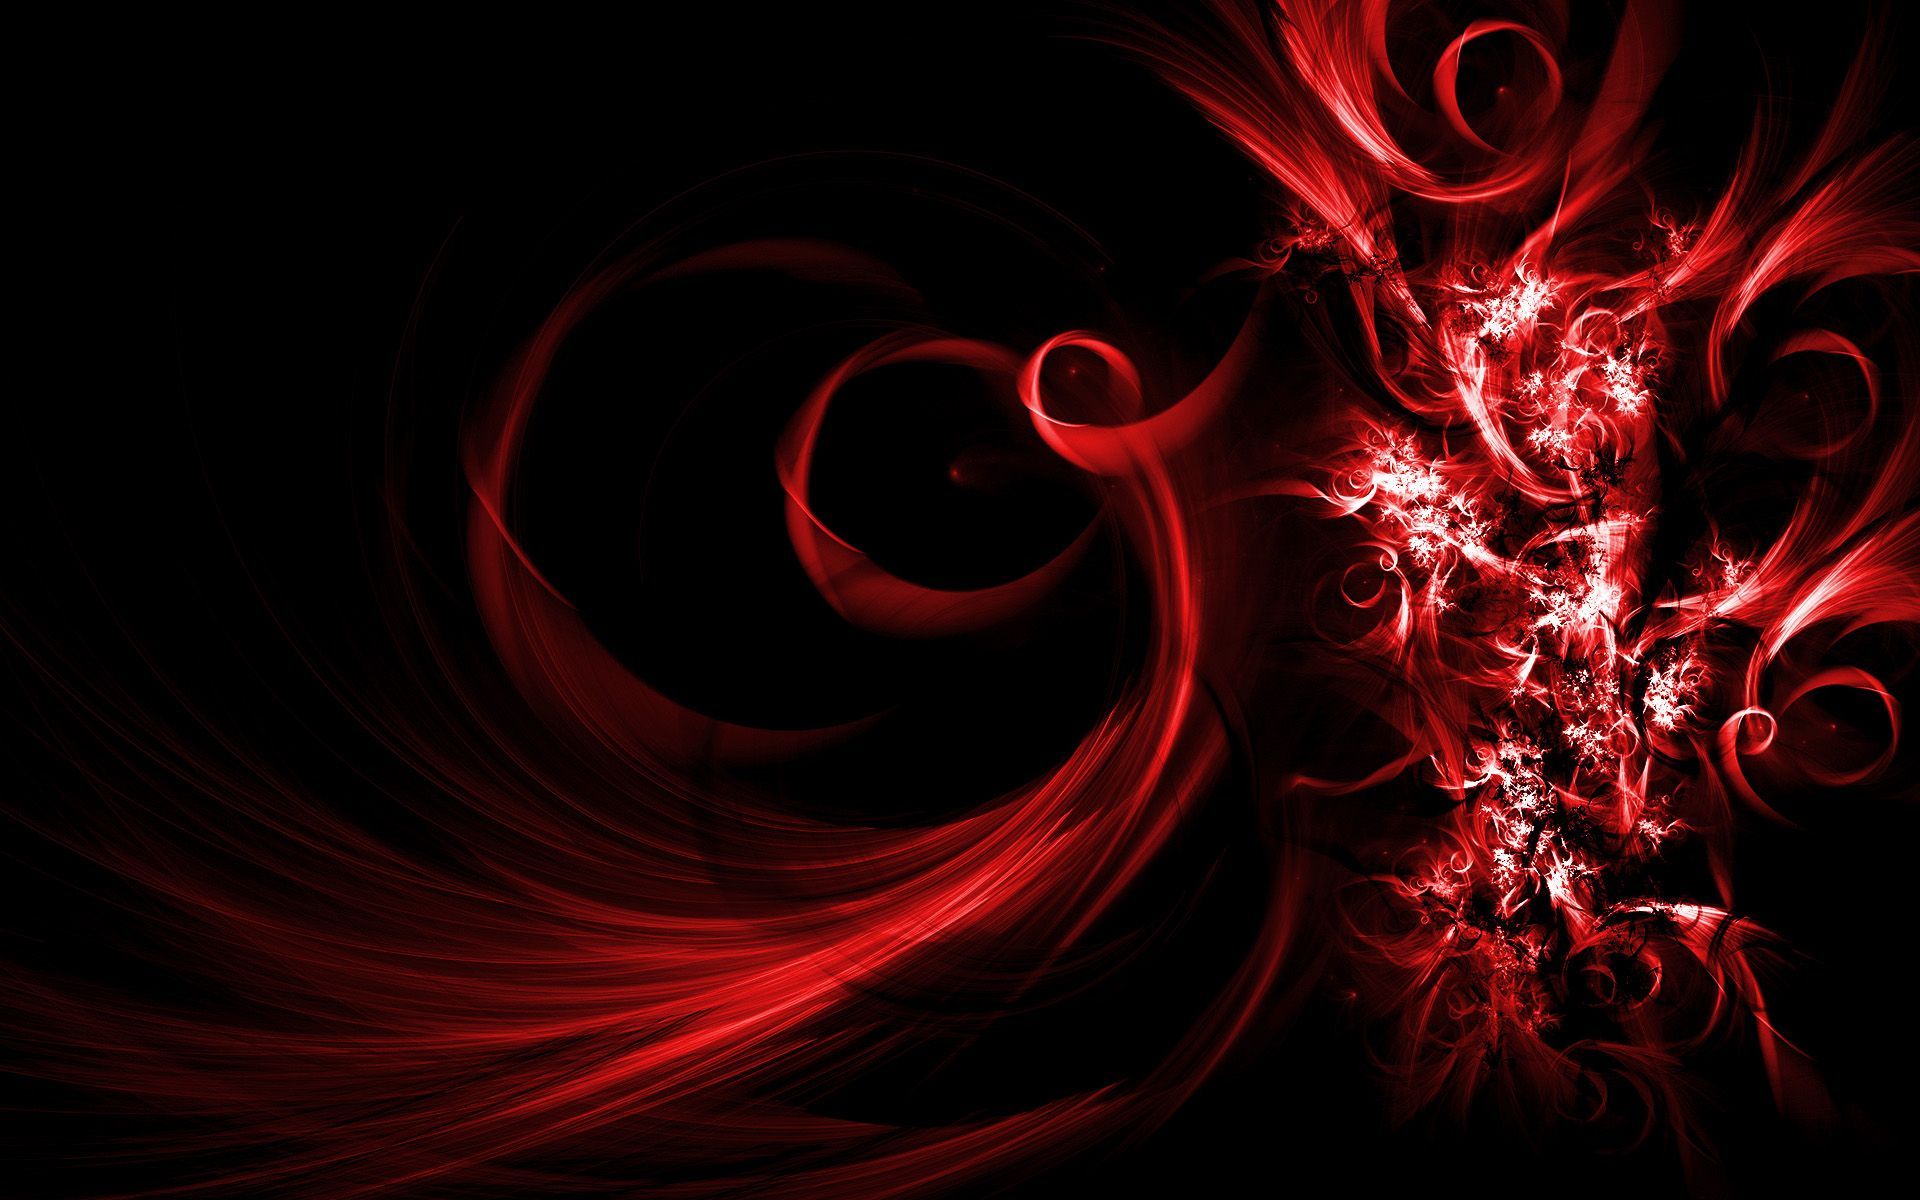 Neat Red Backgrounds wallpaper | 1920x1200 | #10802